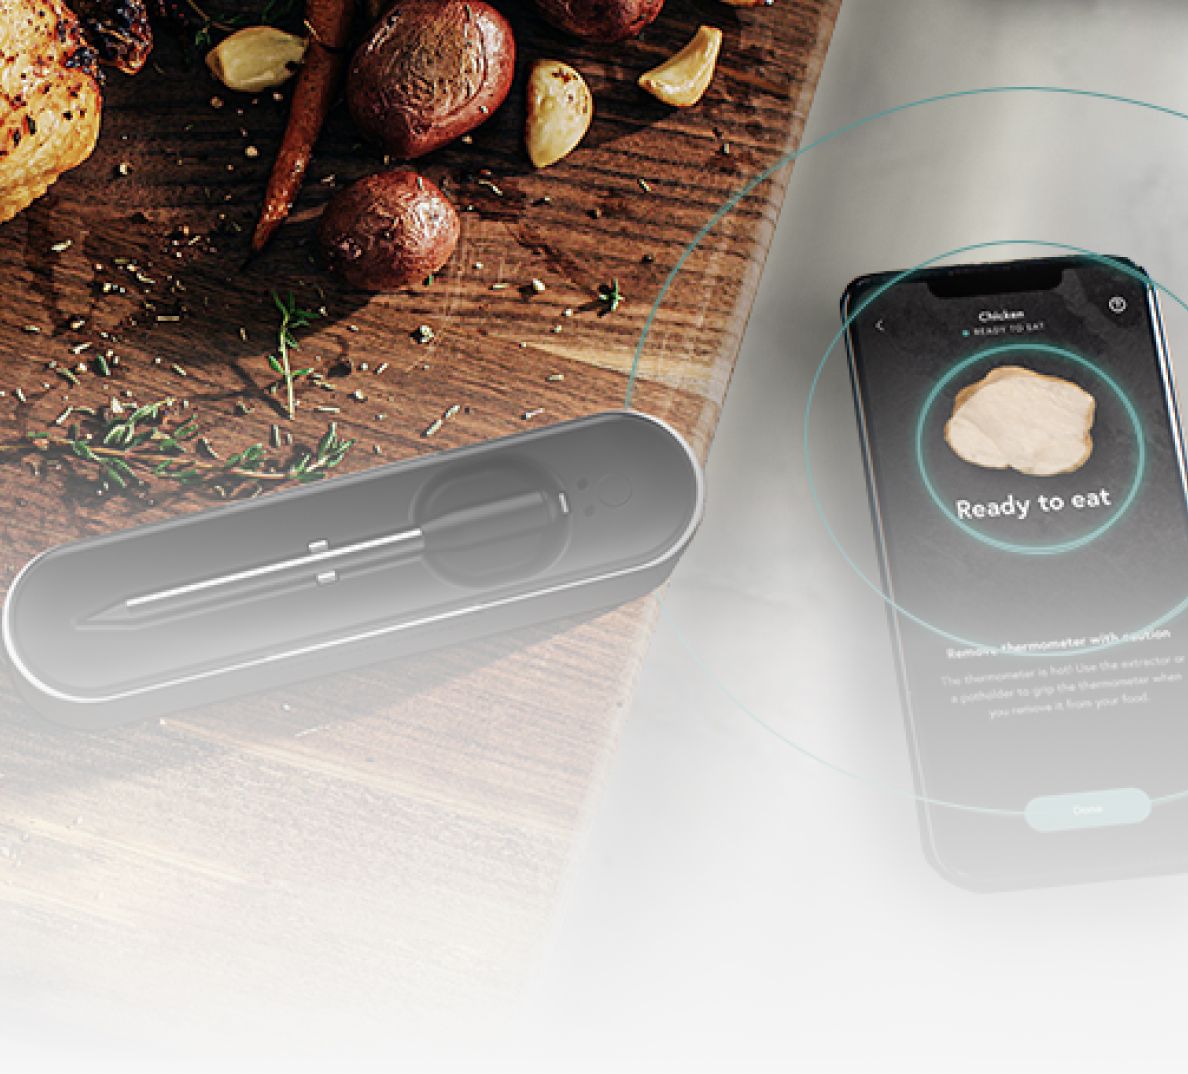 Yummly® Smart Meat Thermometer.